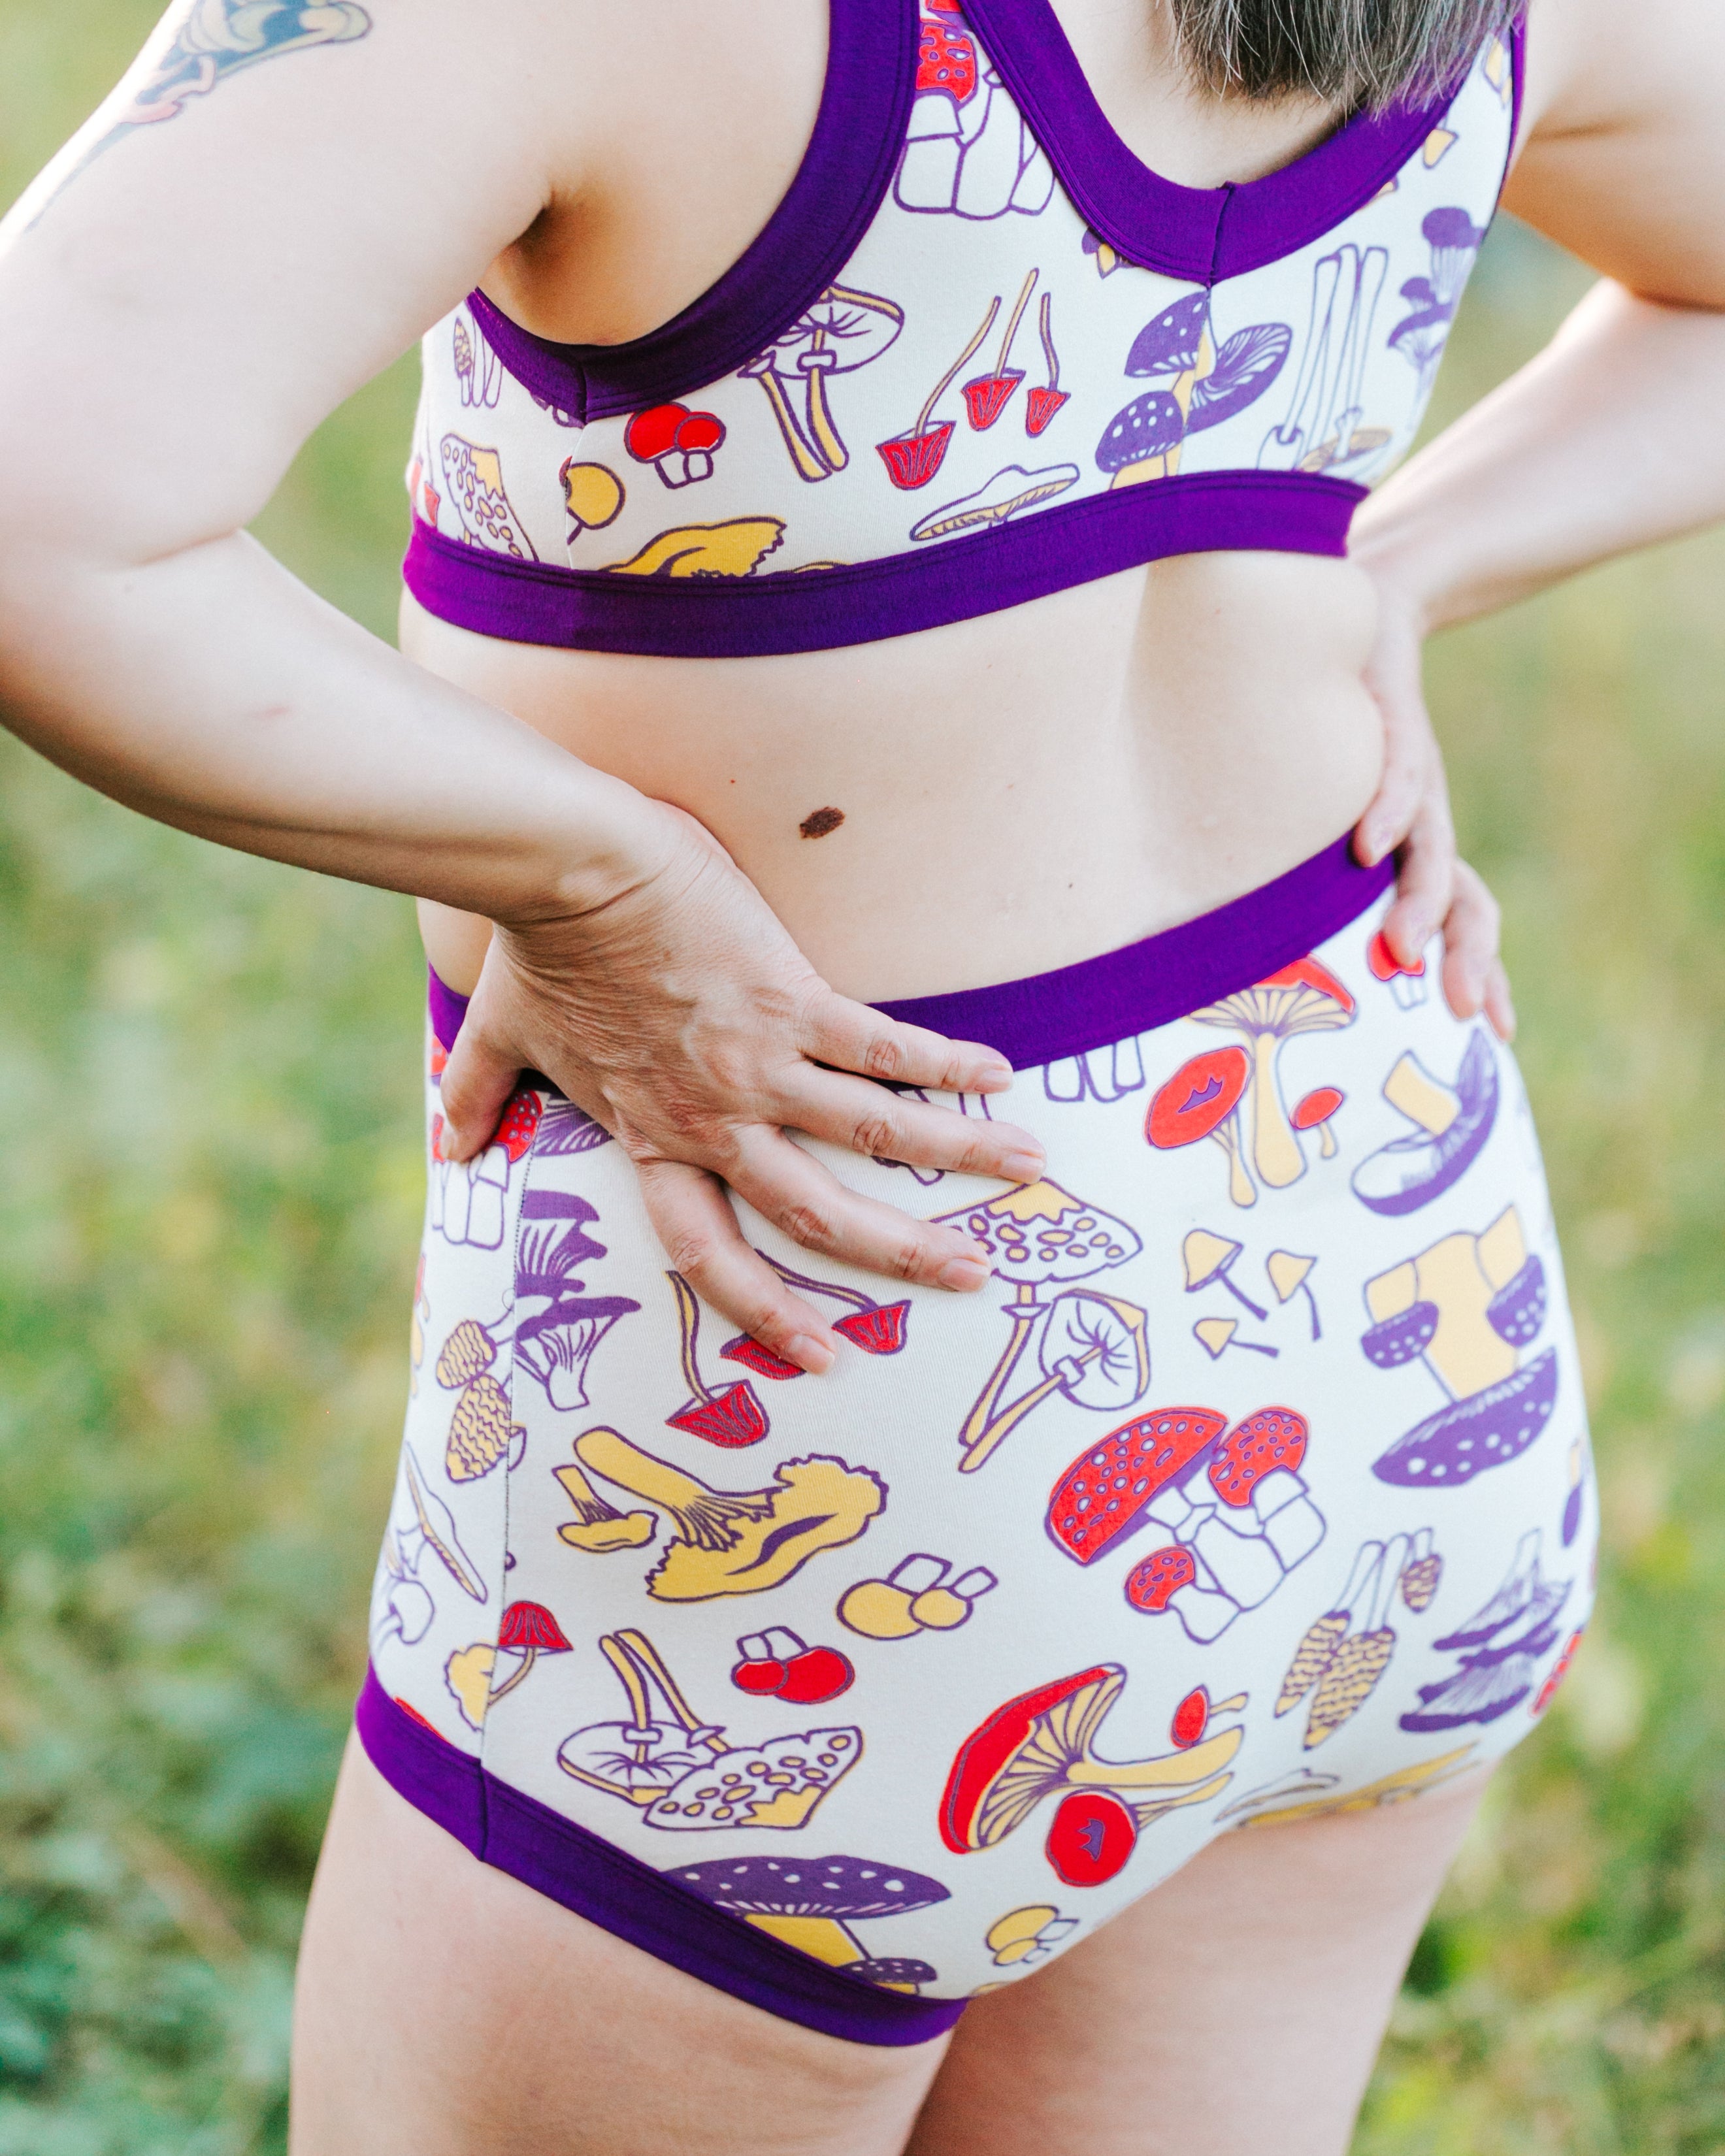 Close up of model's bum in Original style underwear in Mushroom Magic print: different kinds of mushrooms in red, yellow, and purple colors with dark purple binding.